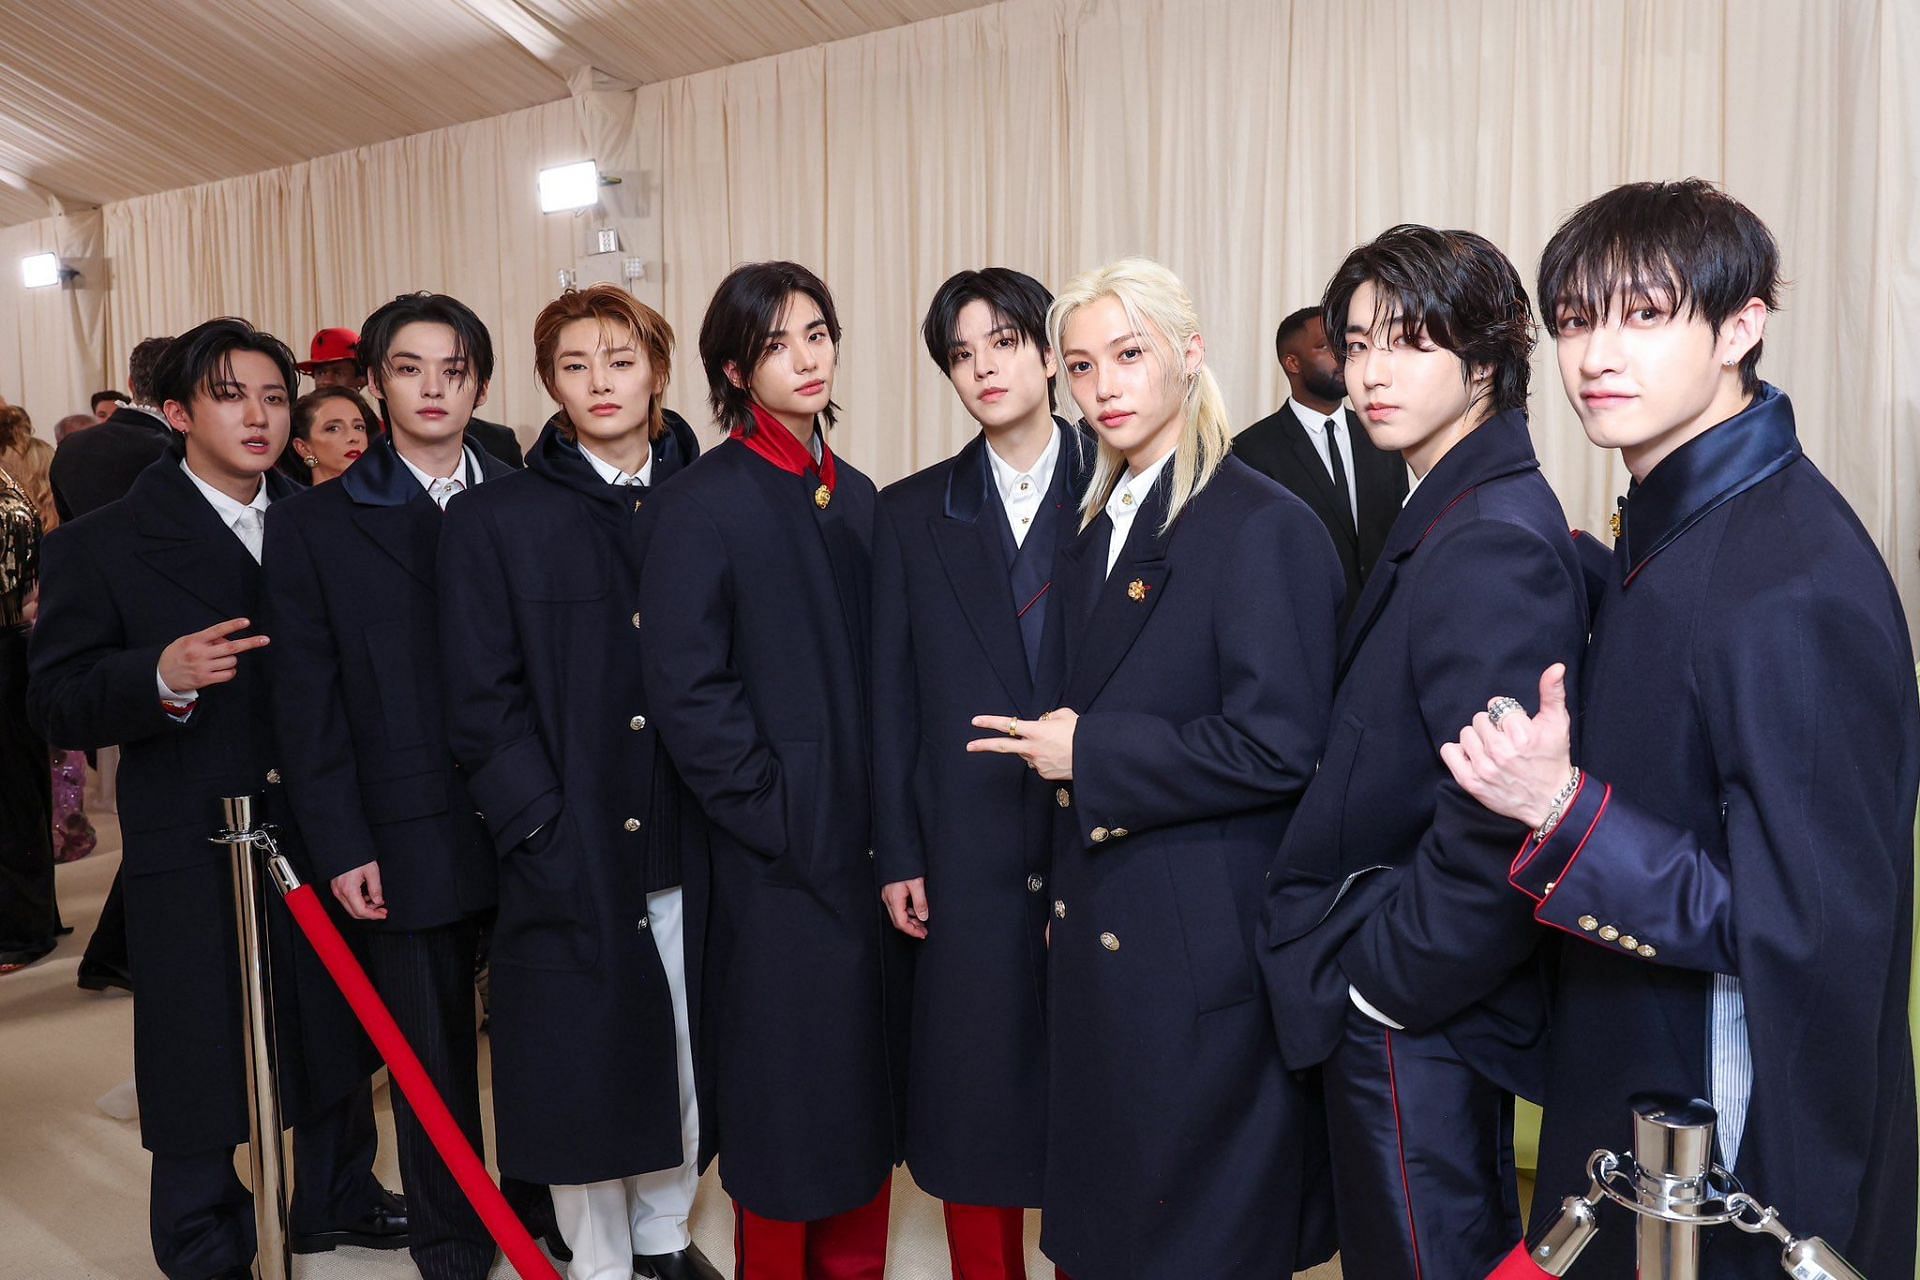 Stray Kids&rsquo; fans divided over Vogue&rsquo;s alleged mixup and mentions in a recent article on the group (Image via Tommy Hilfiger/X)